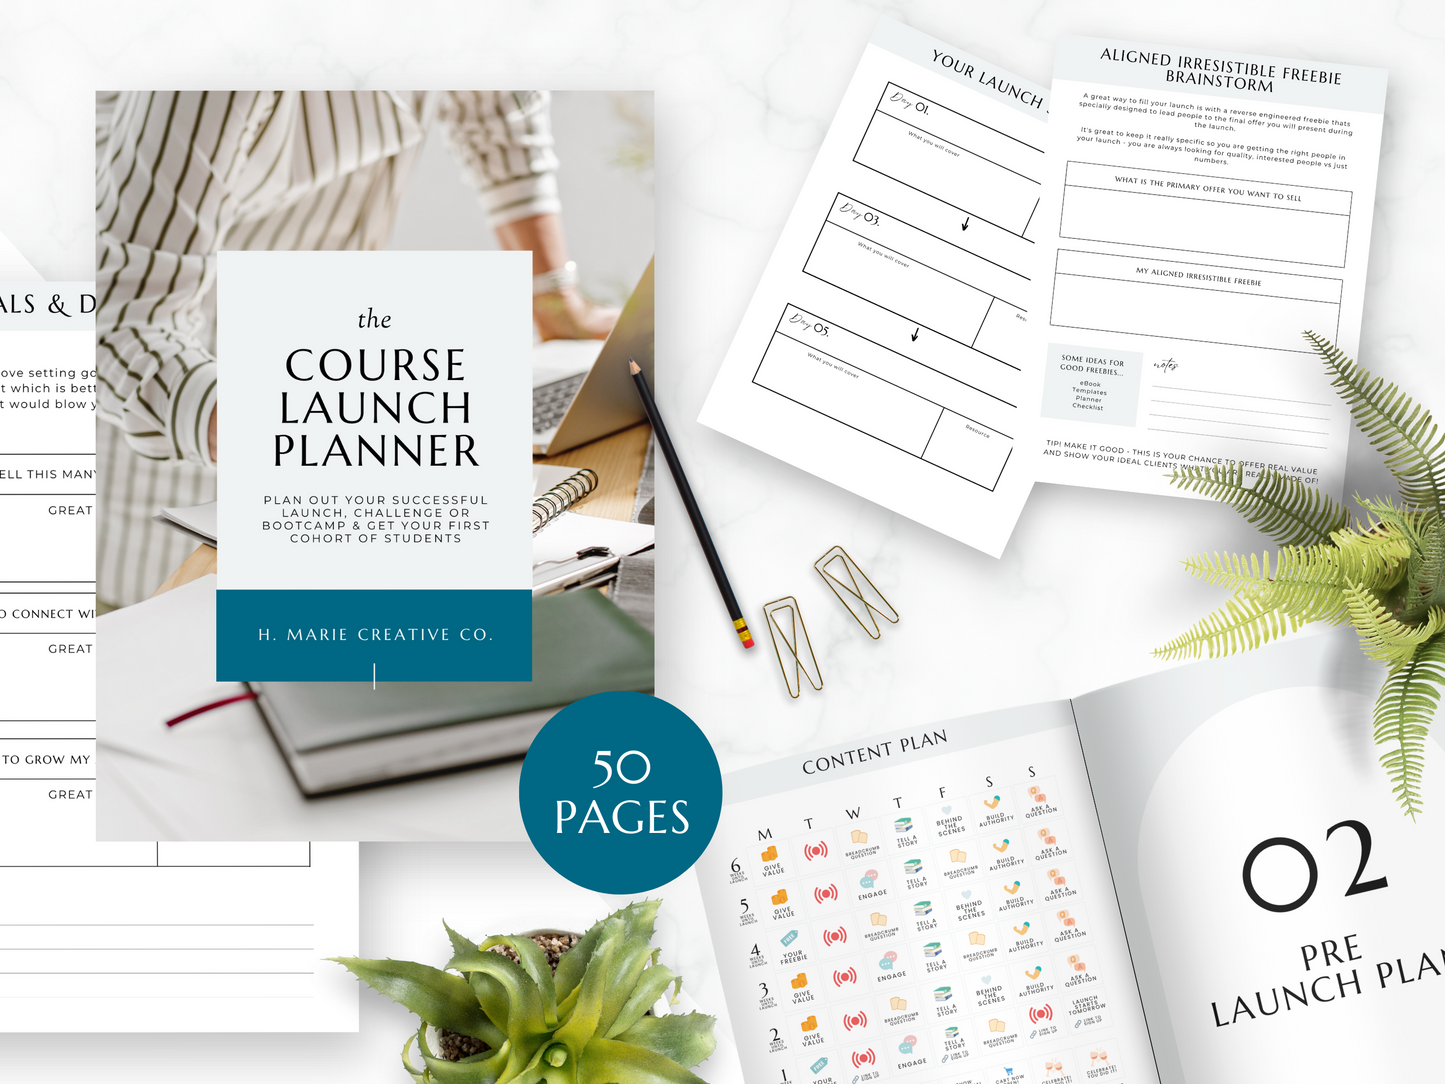 The Course Launch Planner